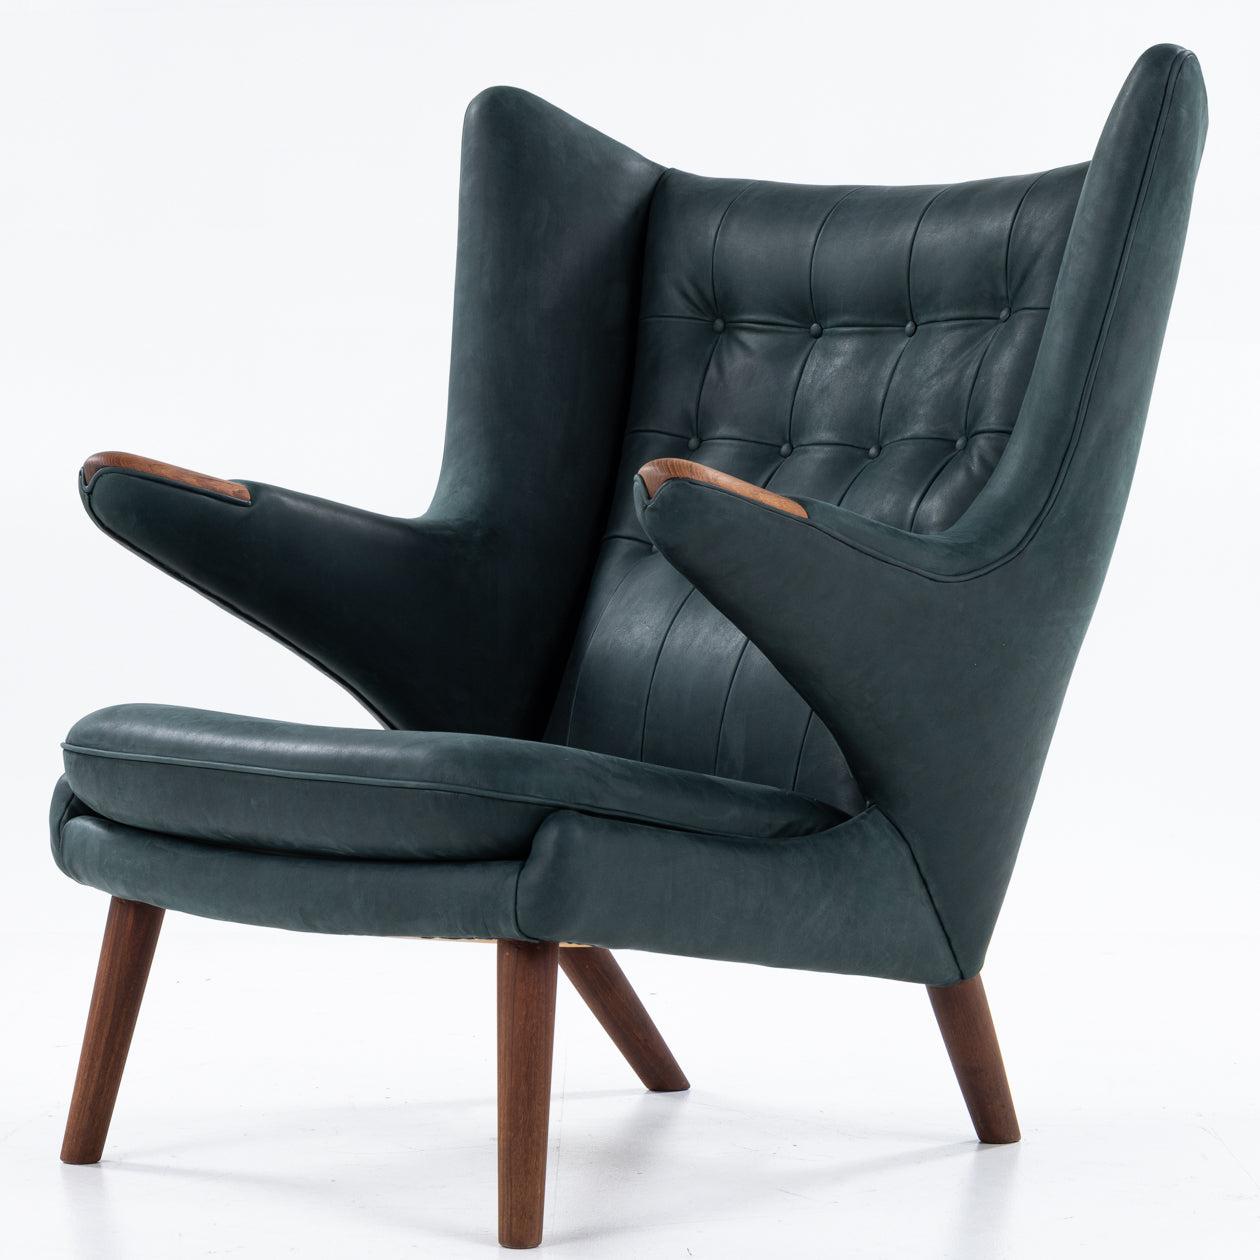 AP 19 - Reupholstered Papa Bear Chair in dark green 'Dunes' aniline leather (colour: Racing Green).

ABOUT THE ITEM: This is an original ‘Papa Bear Chair' by Hans J. Wegner, produced by the original manufacturer; AP Stolen. The chair is second-hand,